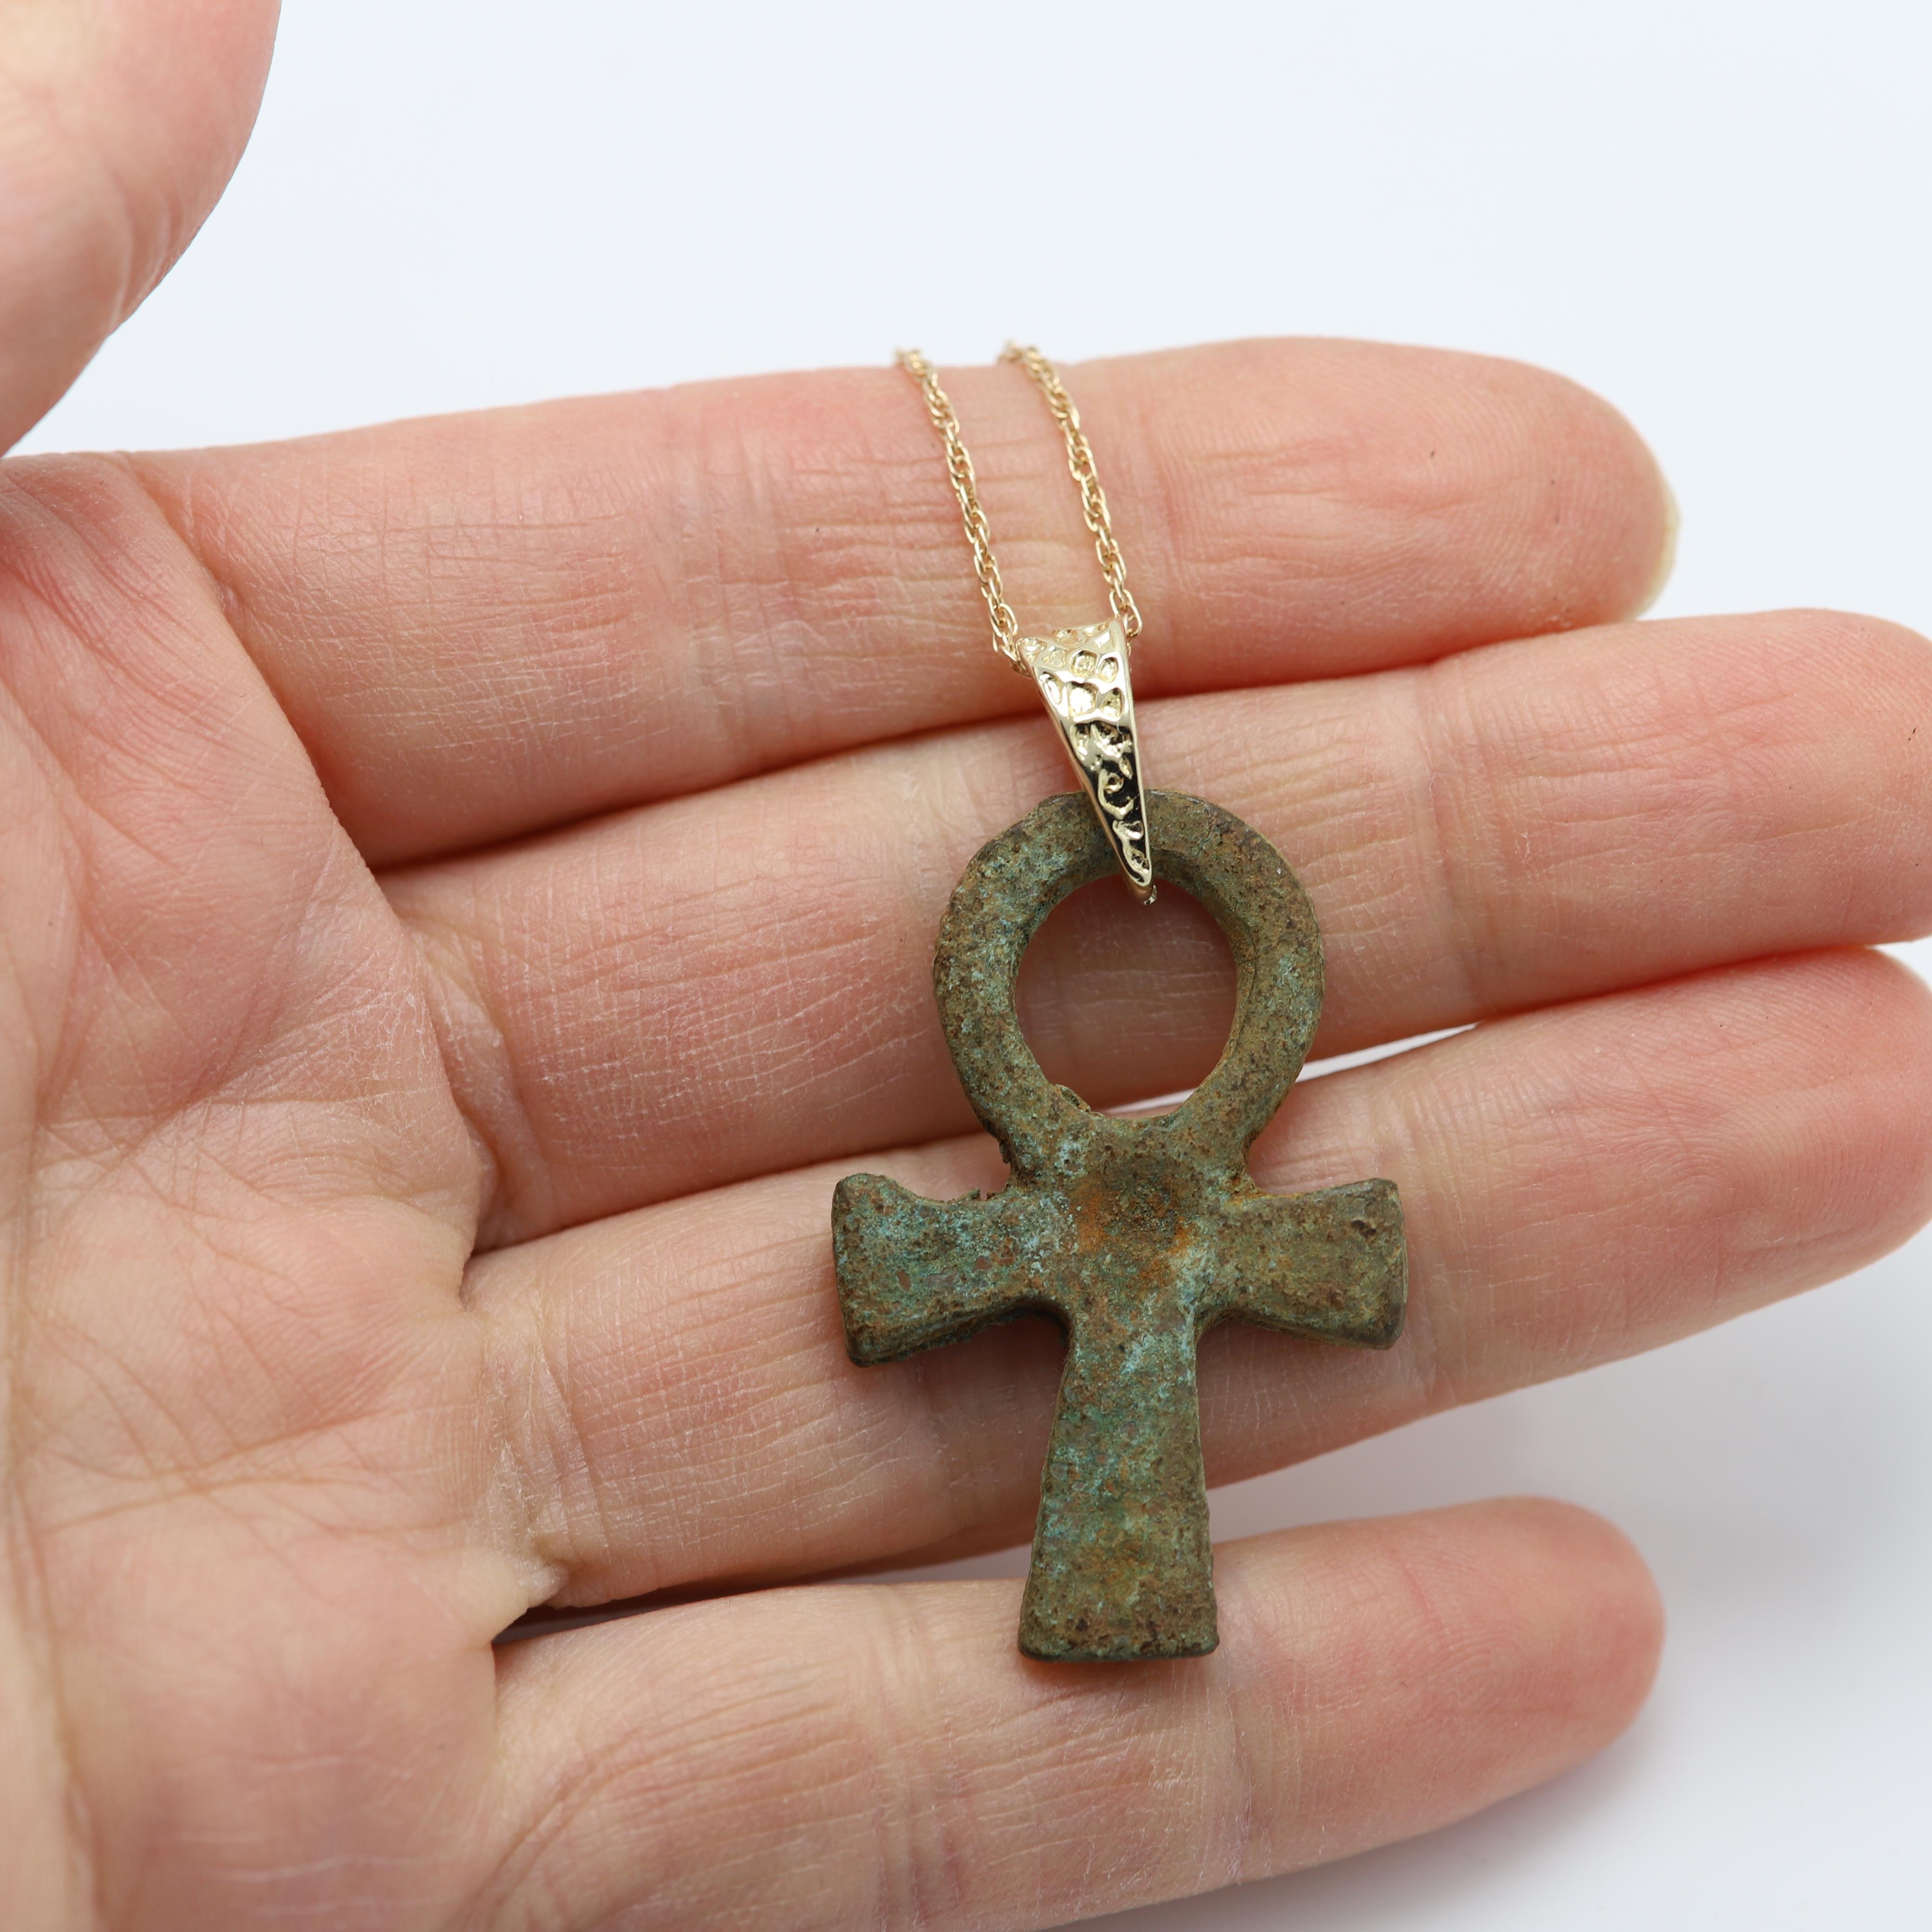 Ancient Authentic Bronze Ankh Pendant, the Egyptian symbol of life, with a rich green patina. 600BC
Approx size 1.75' inch (45 mm) 
14k Yellow Gold chain & bail.
Chain size: 18' inch.
The Onkh is an ancient Egyptian hieroglyphic symbol that was most